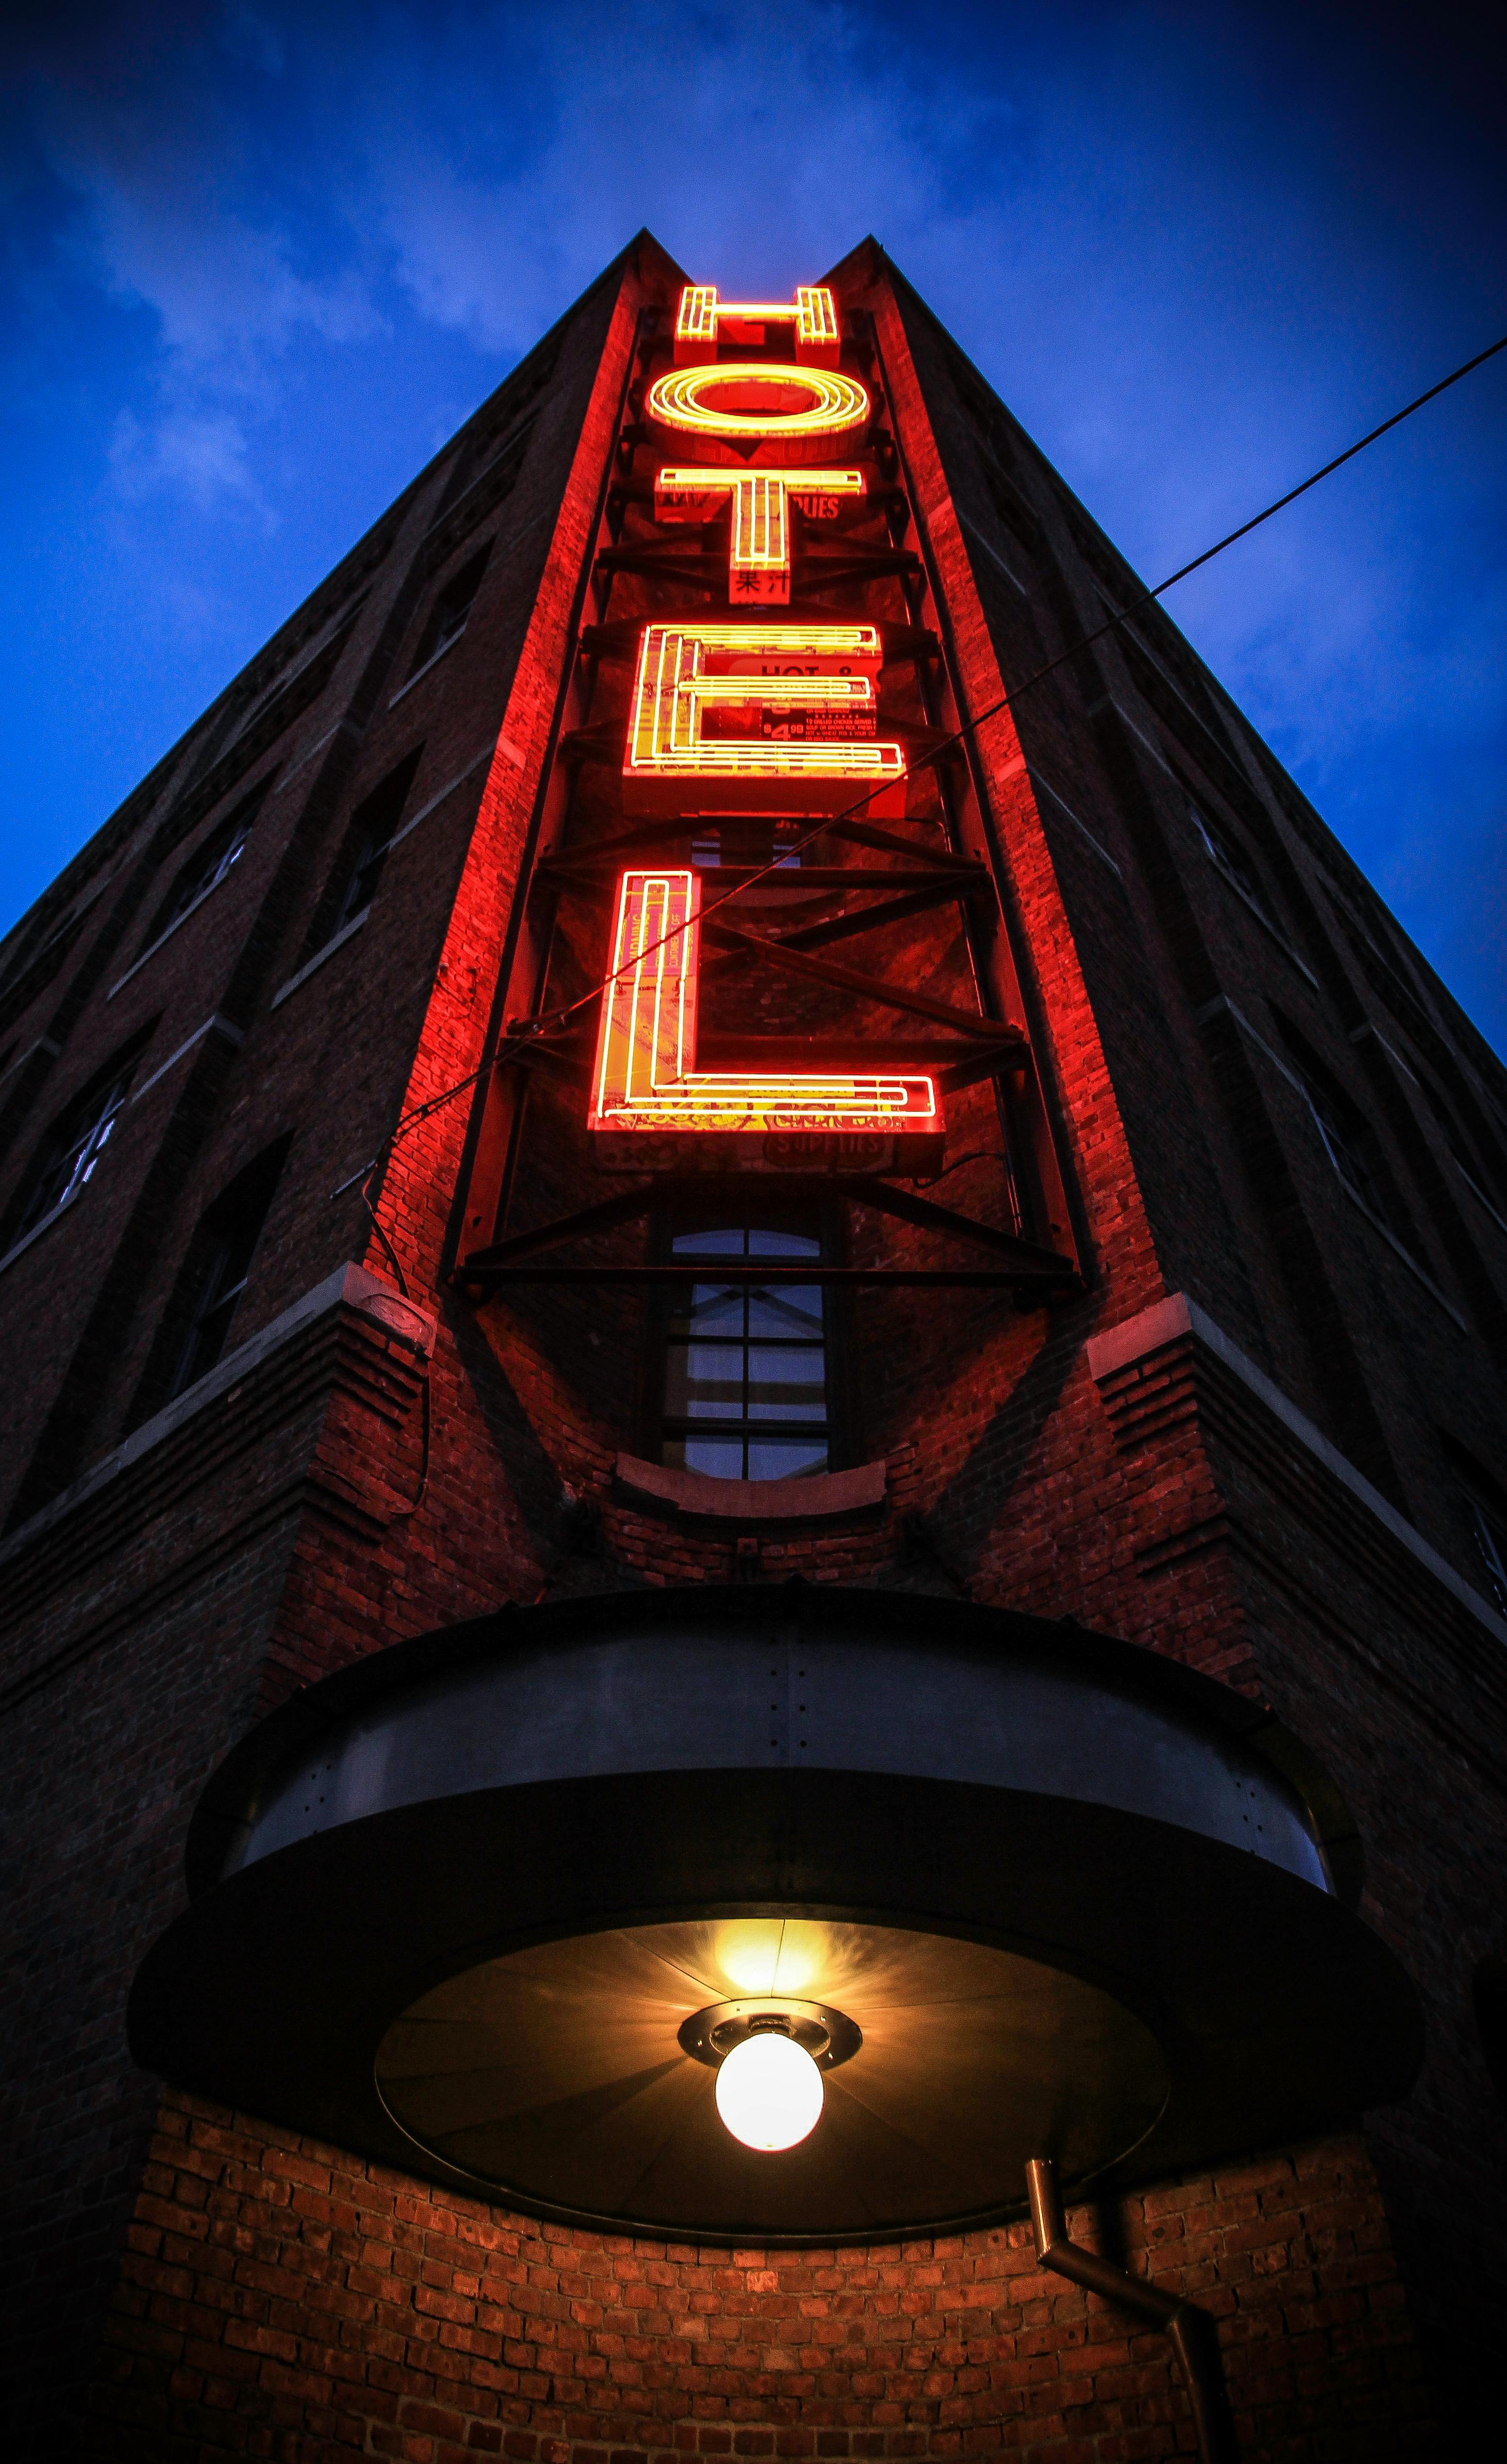 Photo of a local hotel. | Photo: Pexels